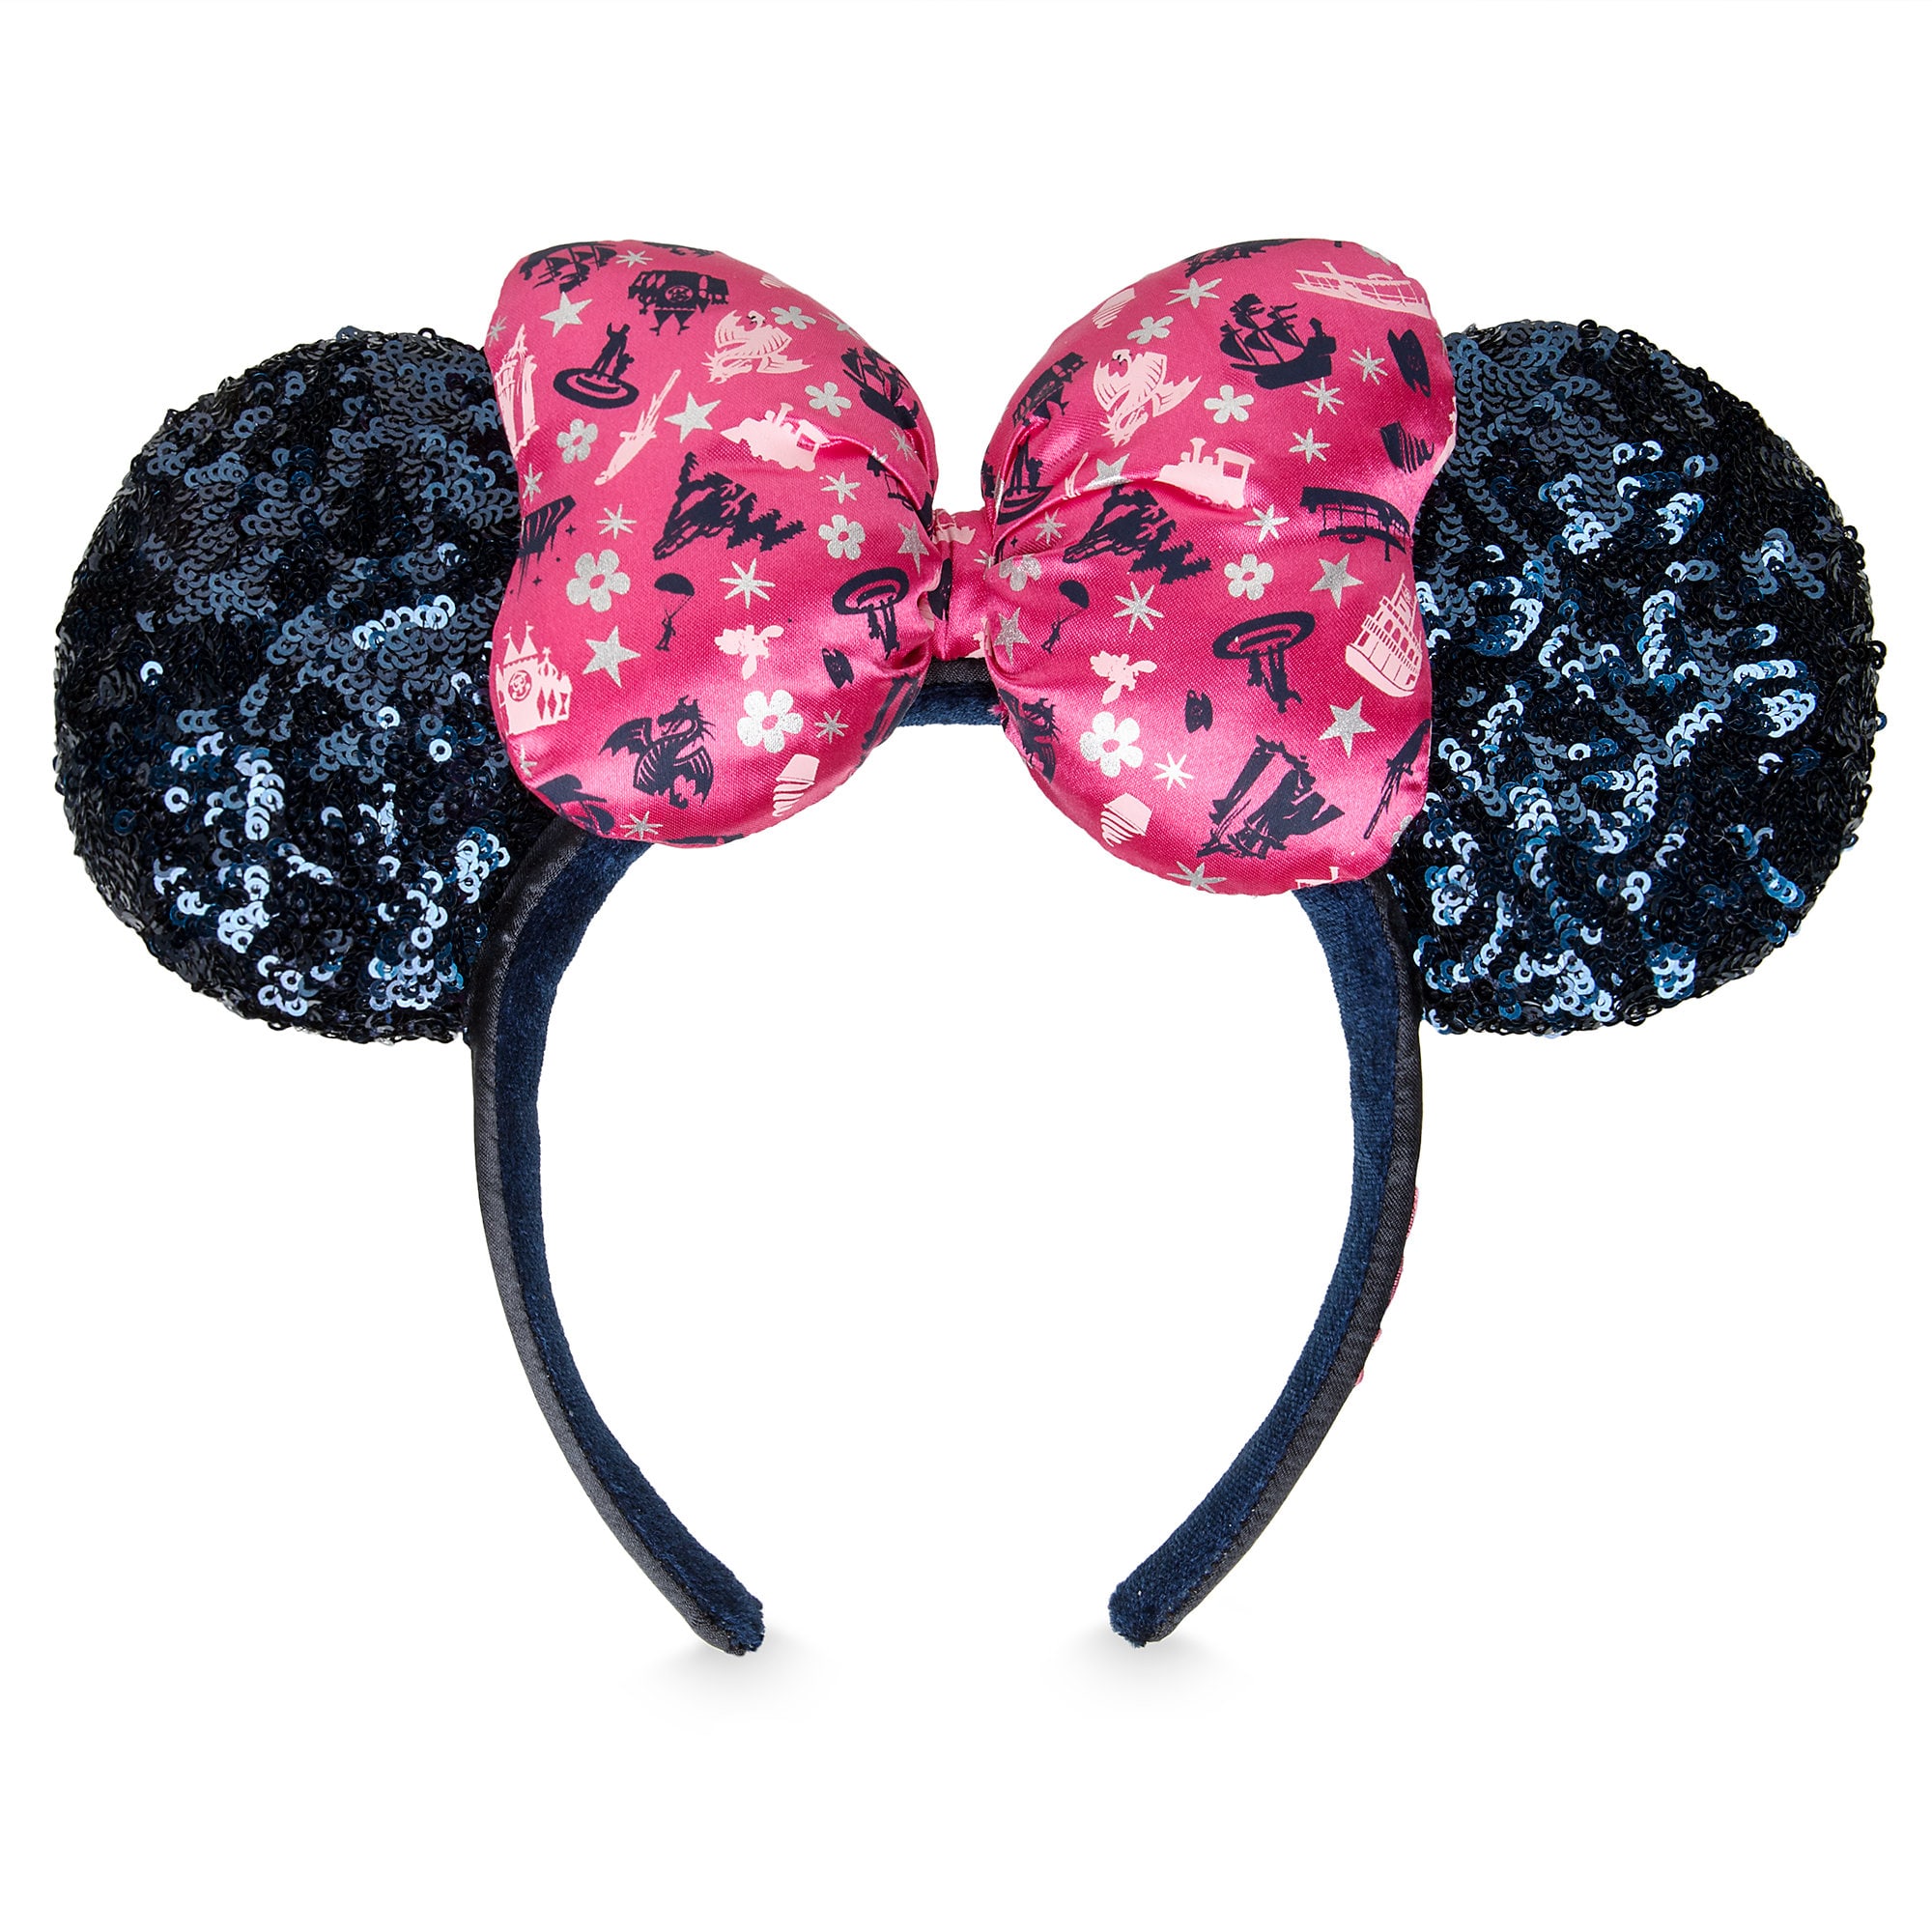 Minnie Mouse Sequined Ear Headband with Satin Bow – Disney Parks 2019 image